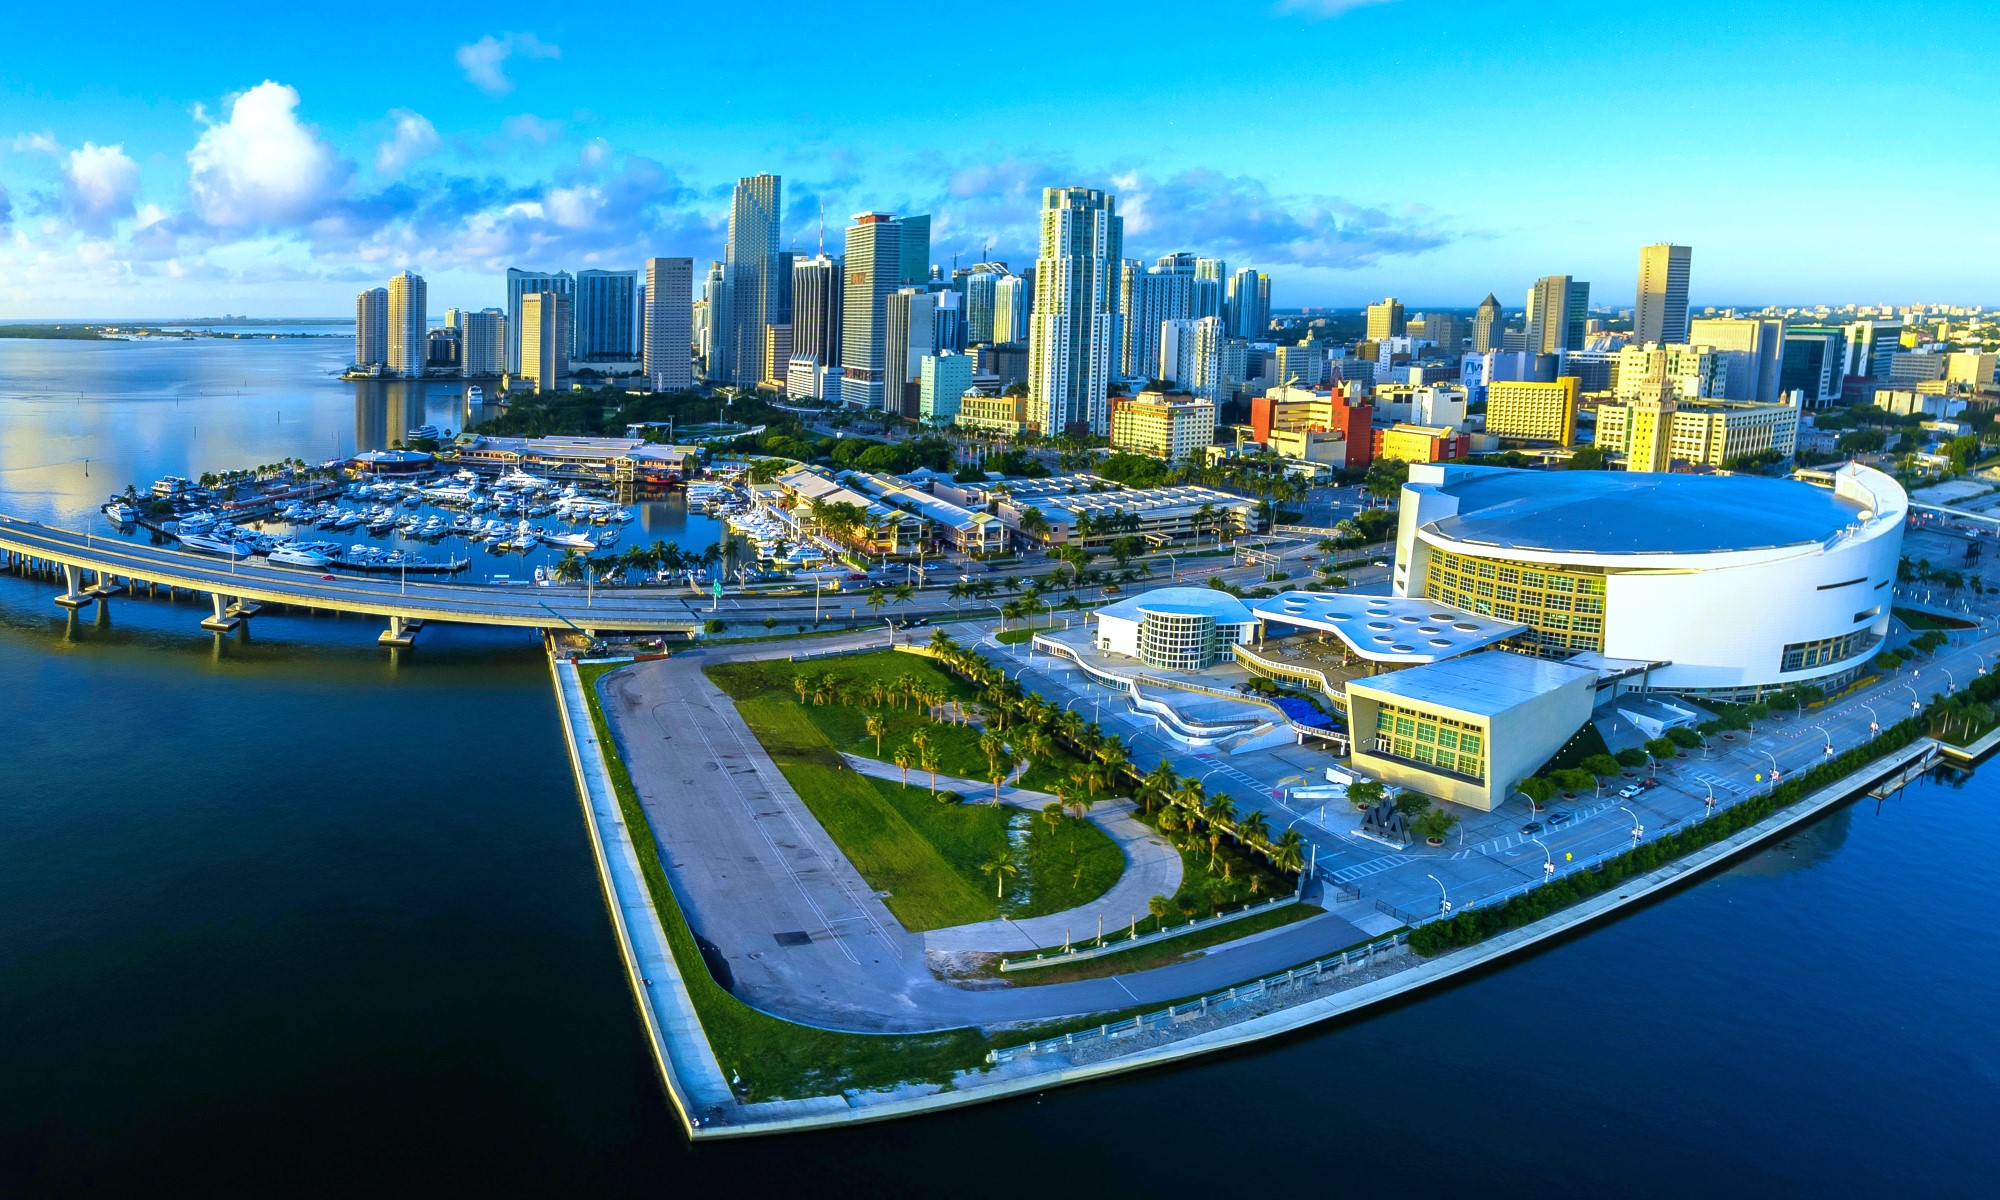 After preliminary approval from the city, Miami is near to receive a Grand Prix of Formula 1